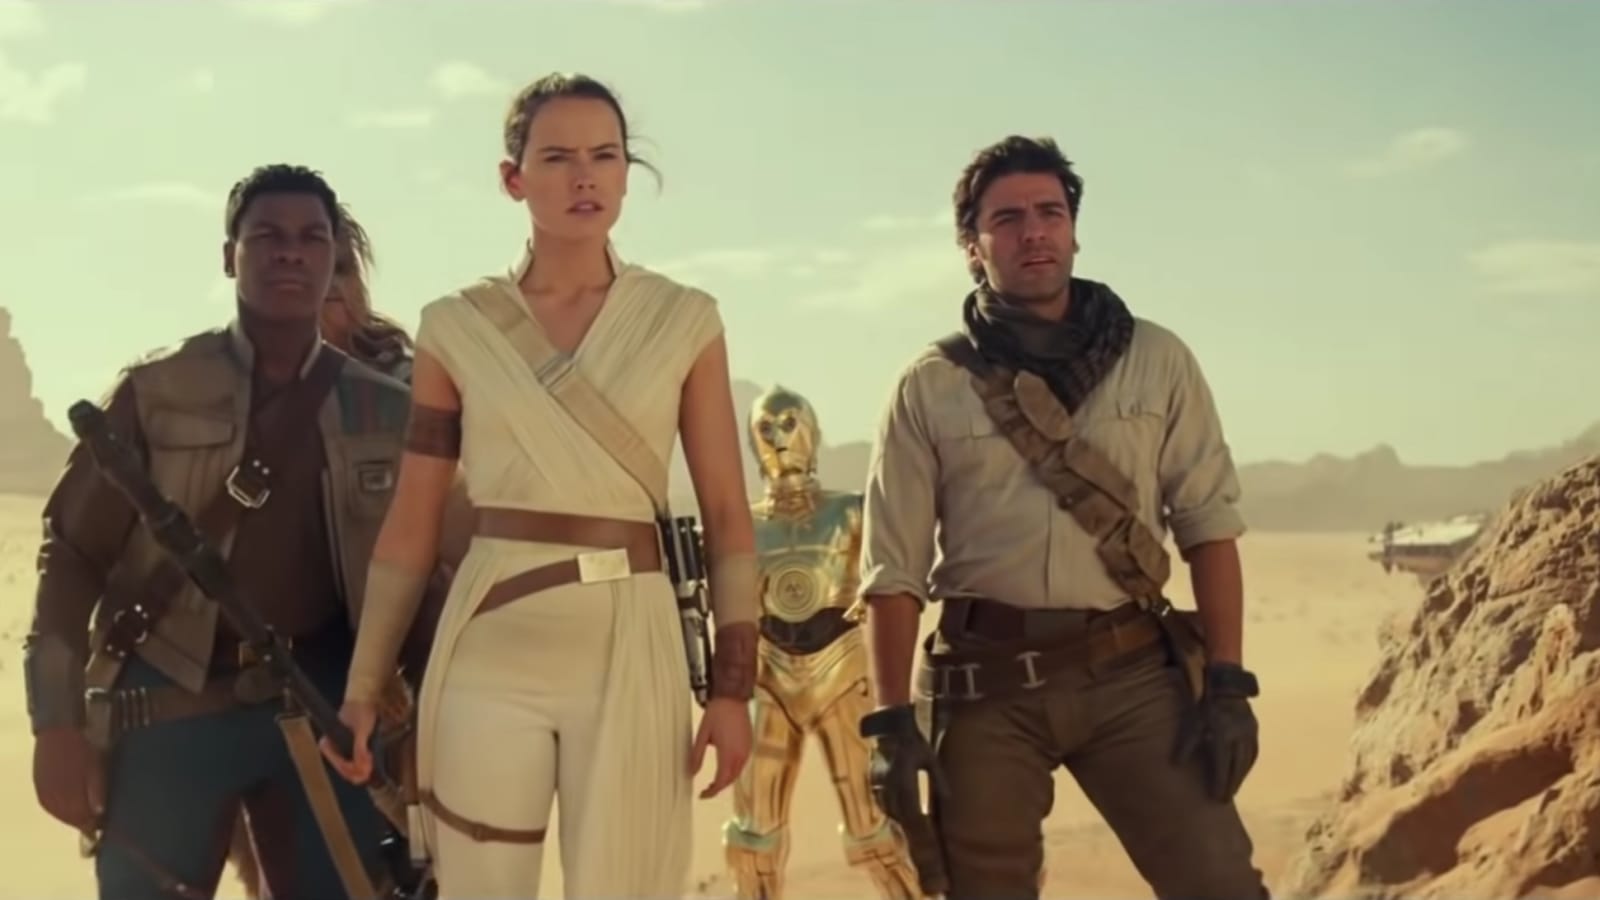 Star Wars' Cast Reveal Their Biggest 'Rise of Skywalker' Challenges from  IMDb on the Scene 